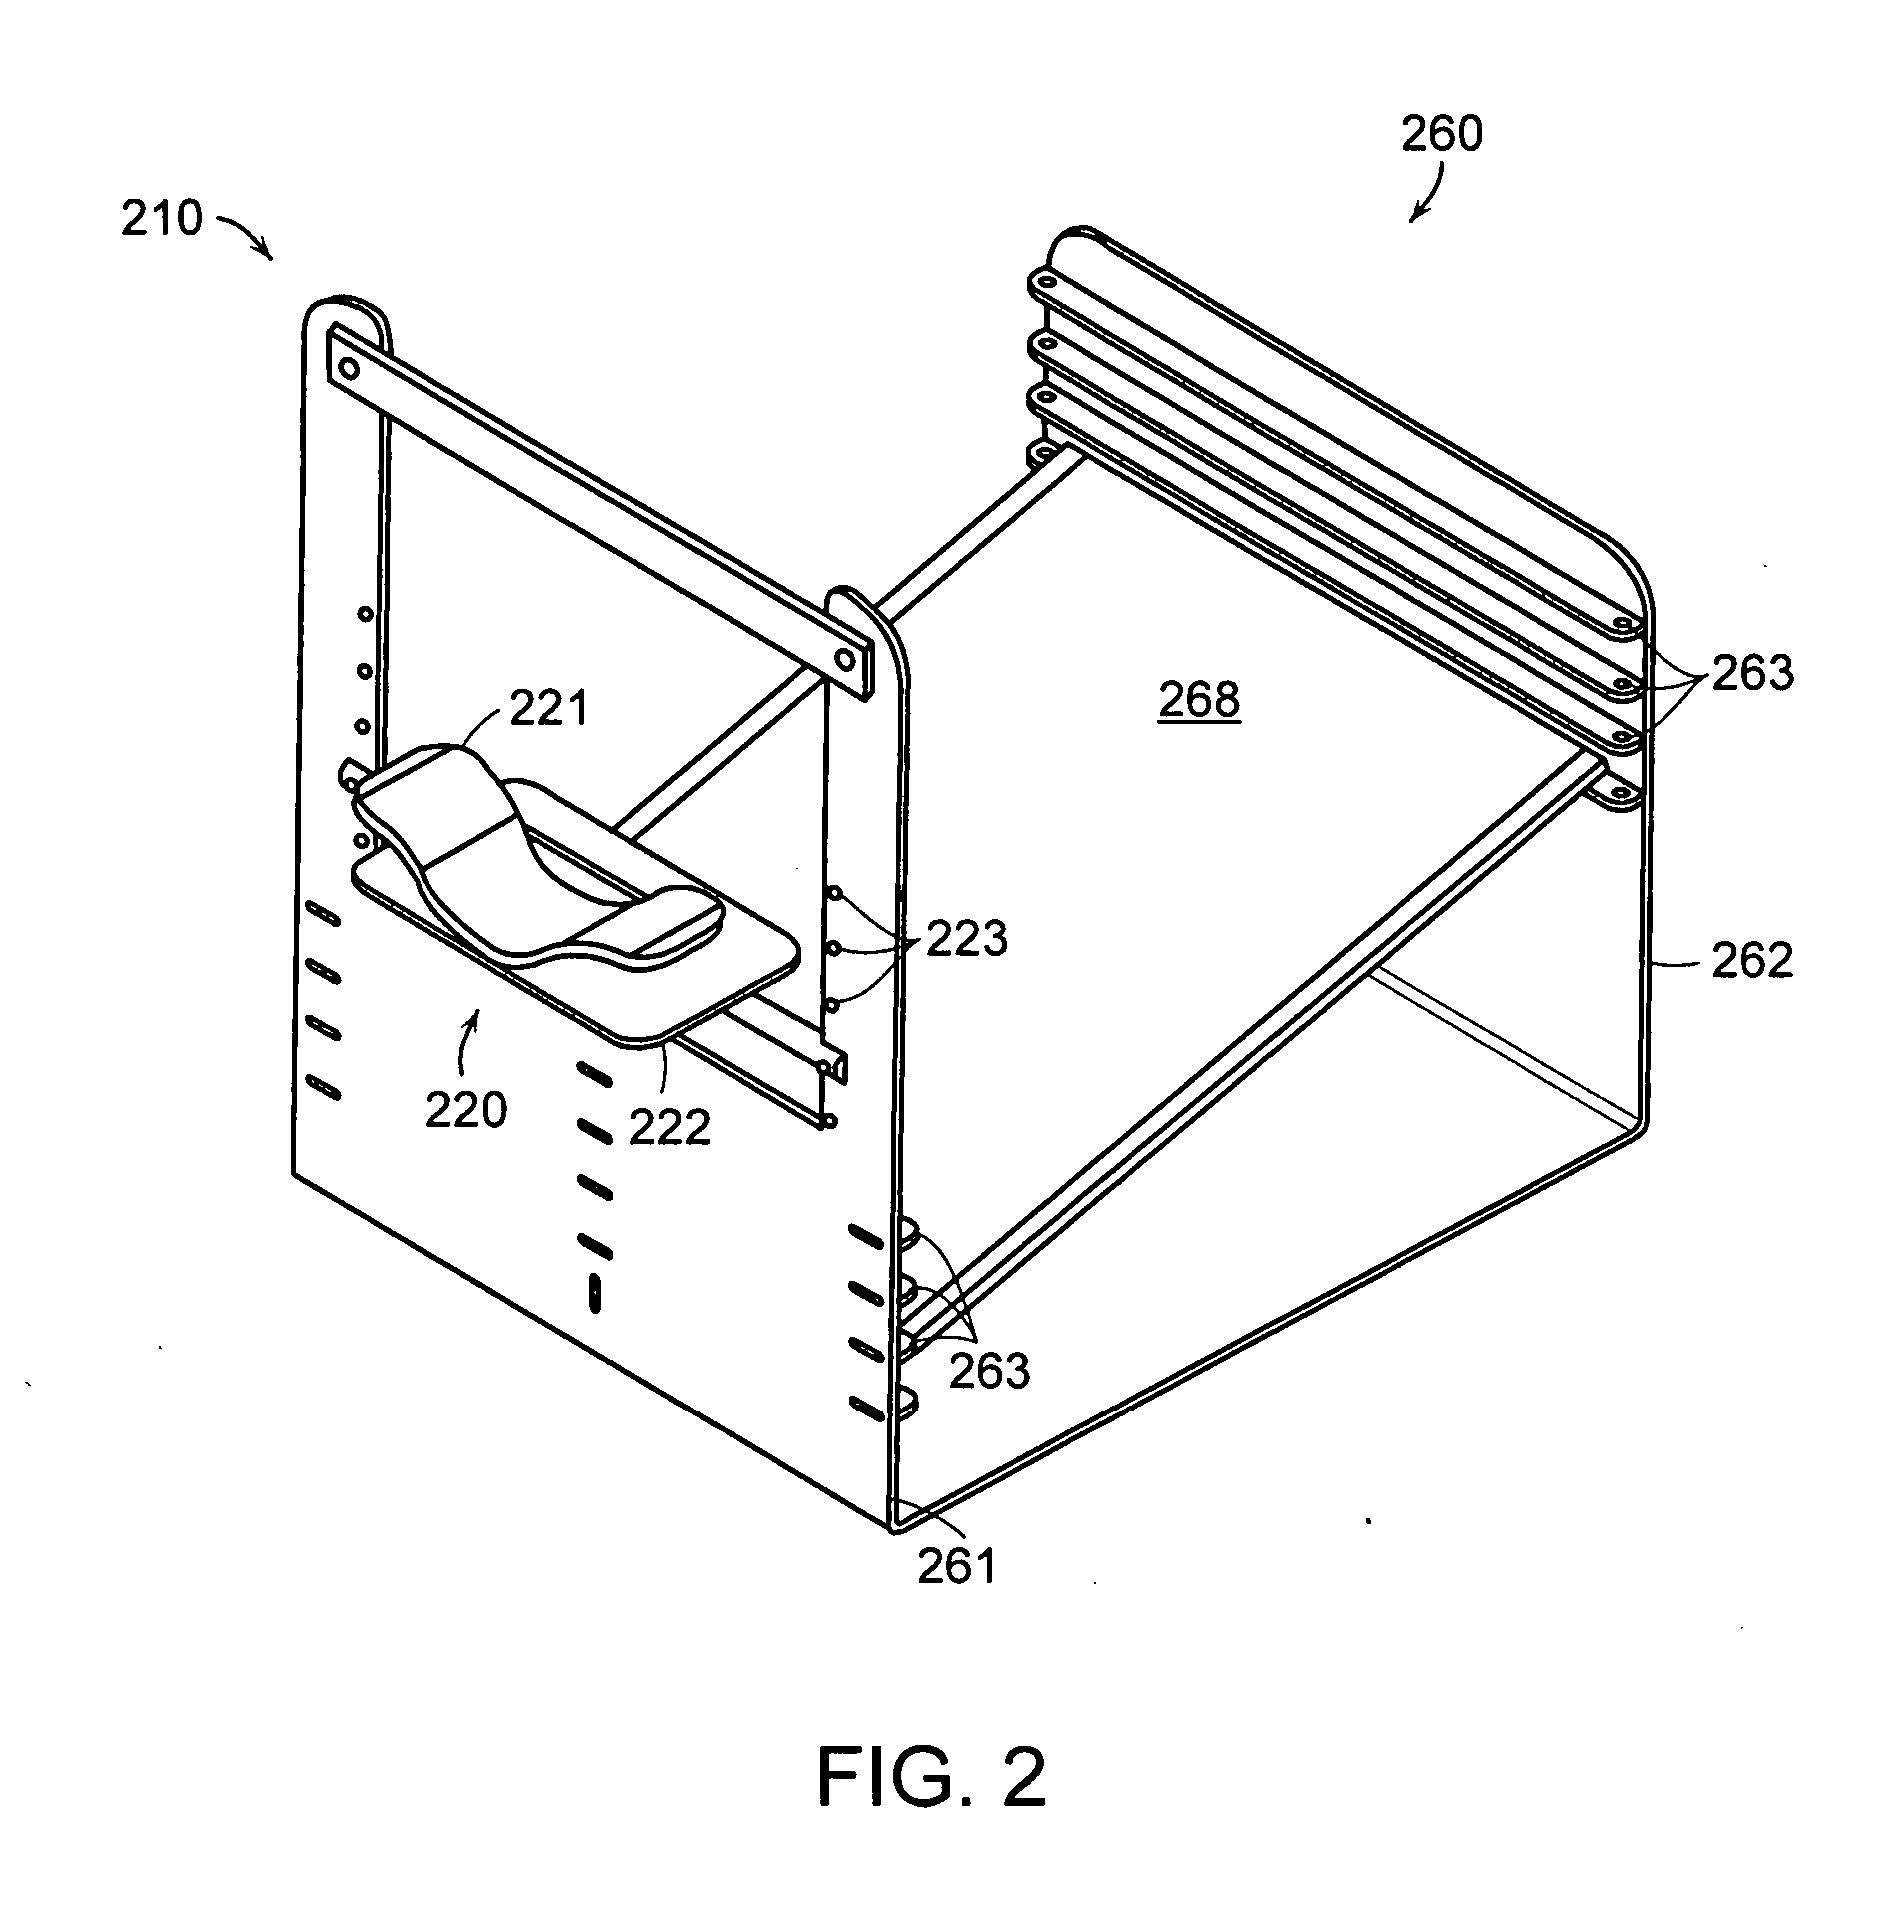 Method and device for guiding a user's head during vision training